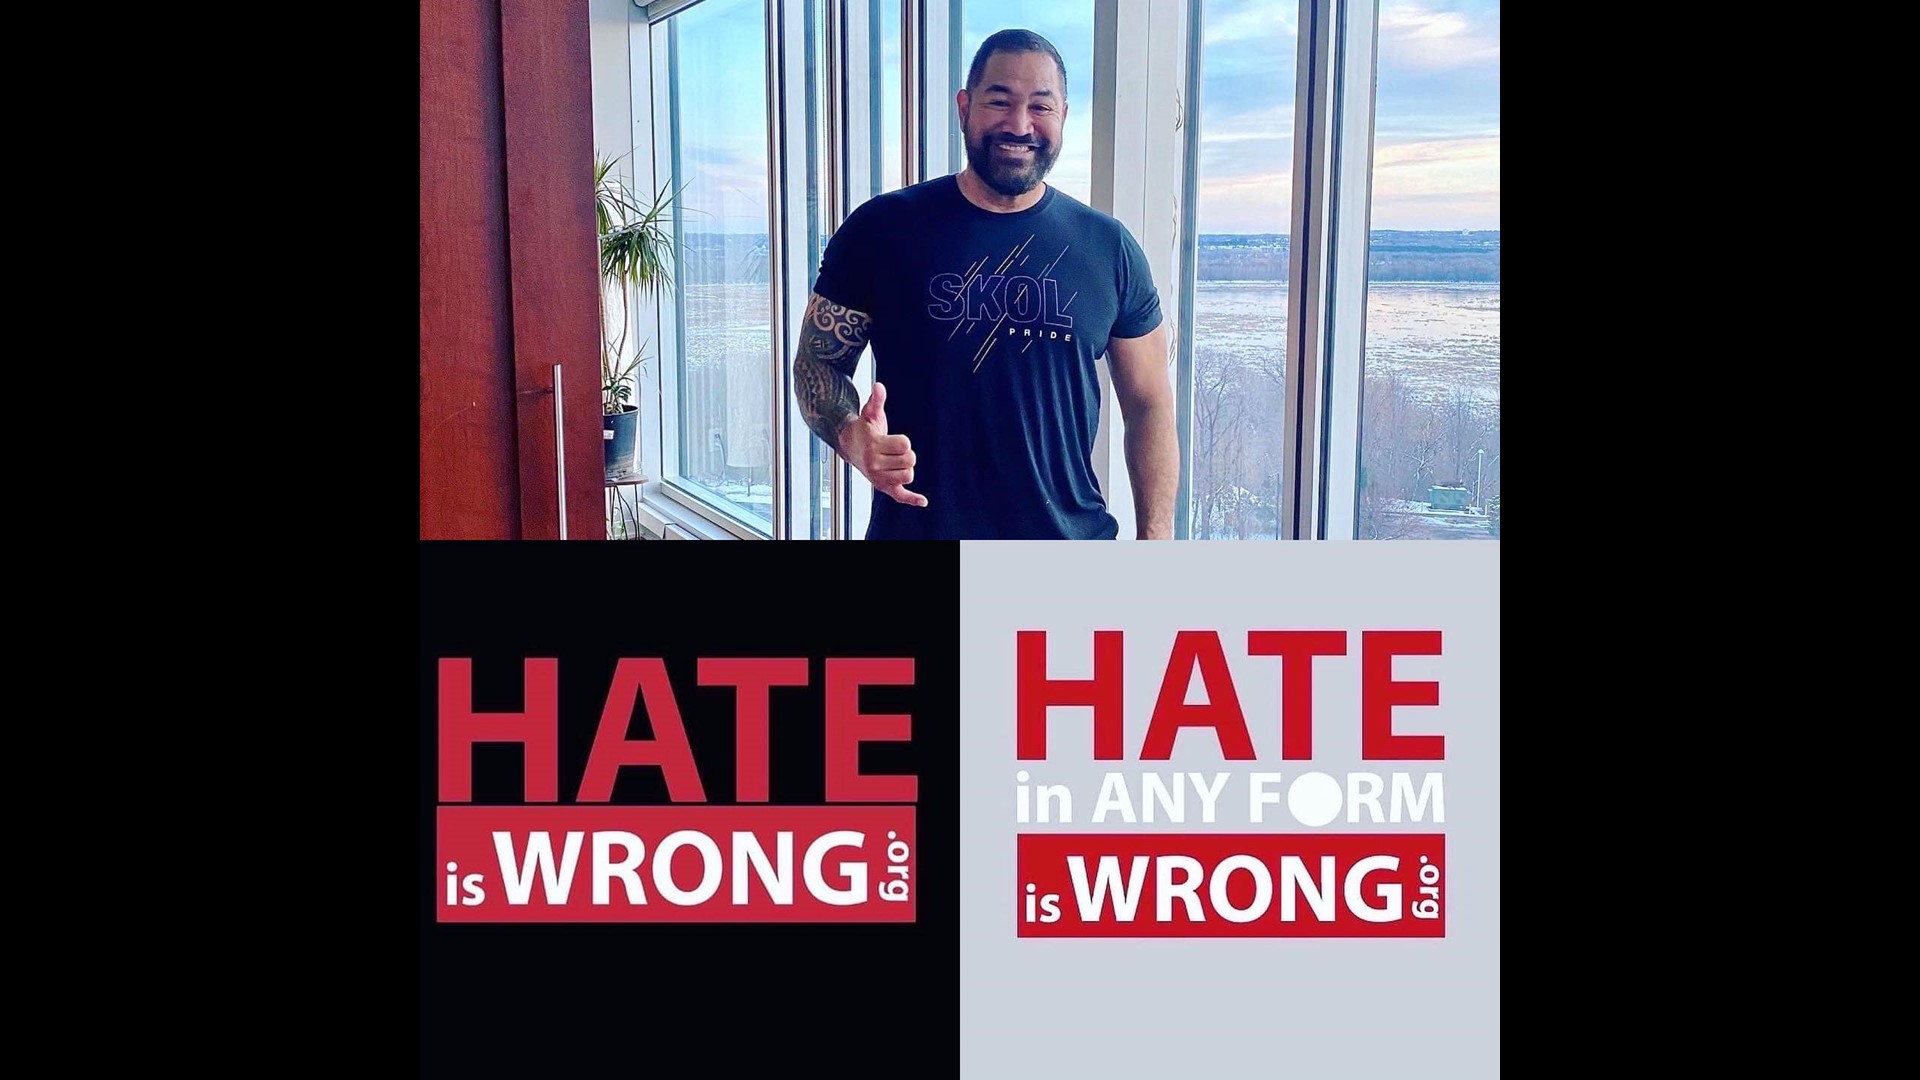 Esera Tuaolo, who played for OSU in the '80s, made national headlines in 2002 when he came out as gay. His nonprofit, Hate is Wrong, aims to end homophobic bullying.